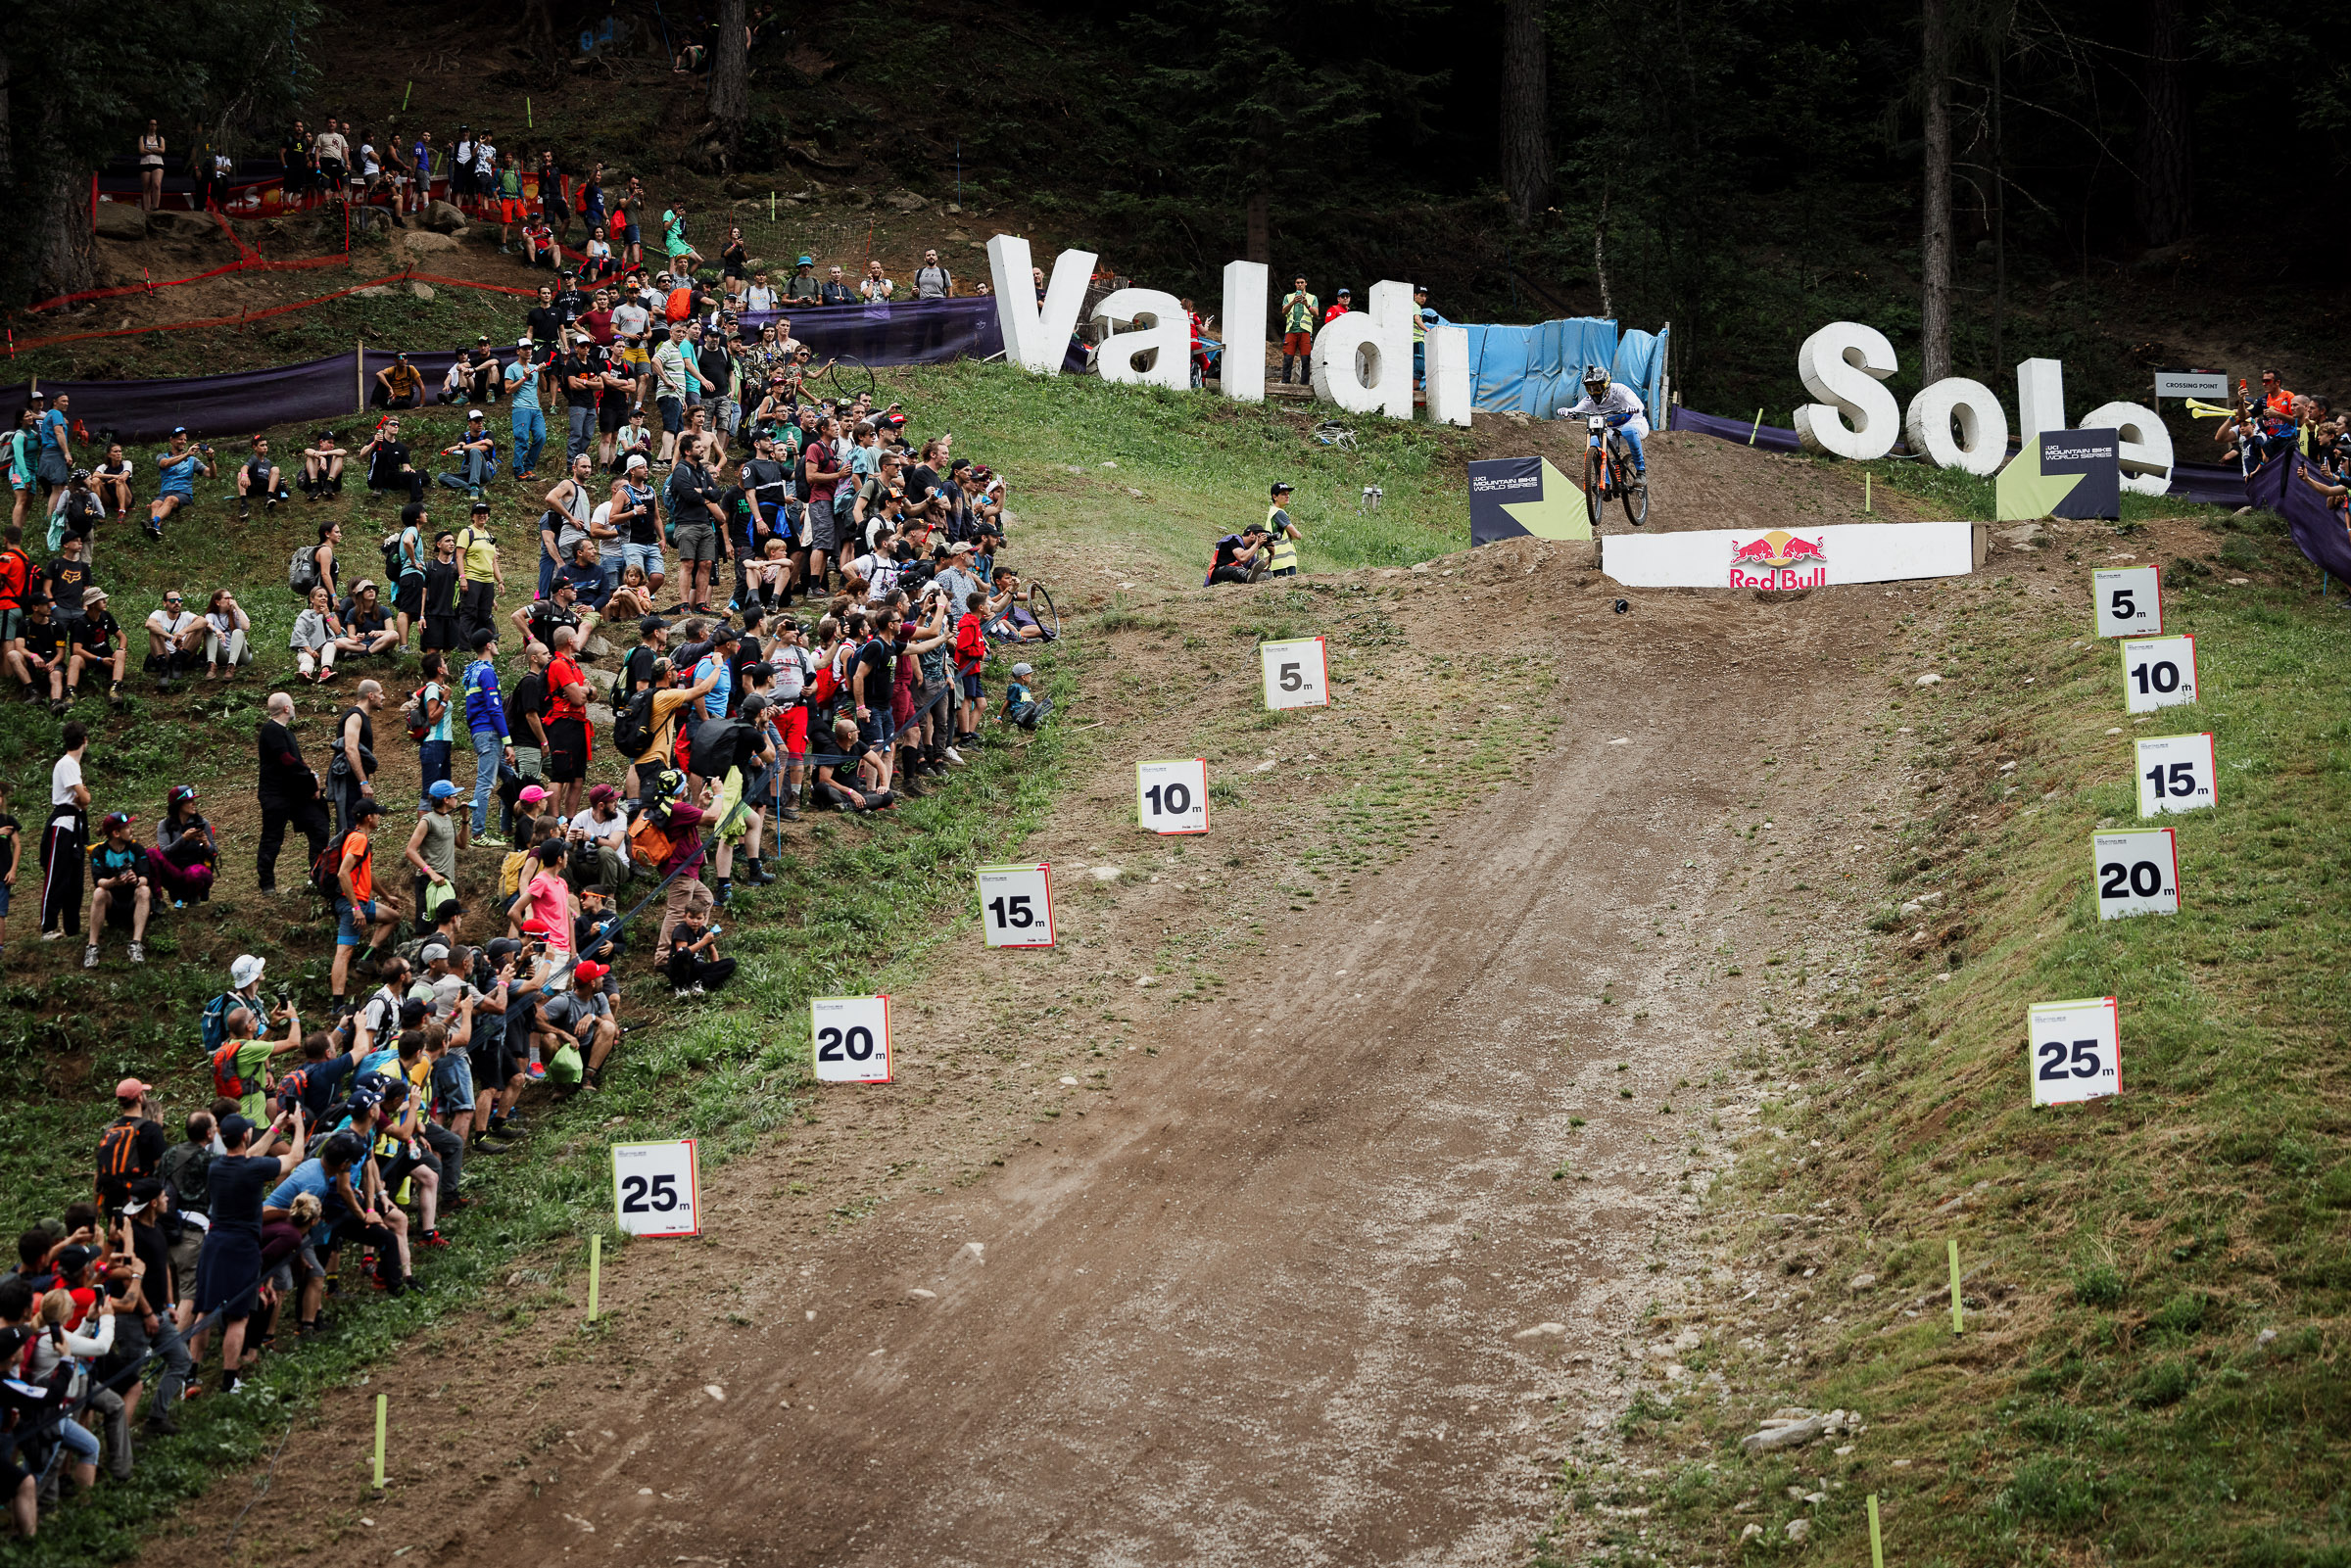 VAL DI SOLE, TRENTINO: WHEN IS IT? WHO IS RIDING? HOW TO FOLLOW THE ACTION?